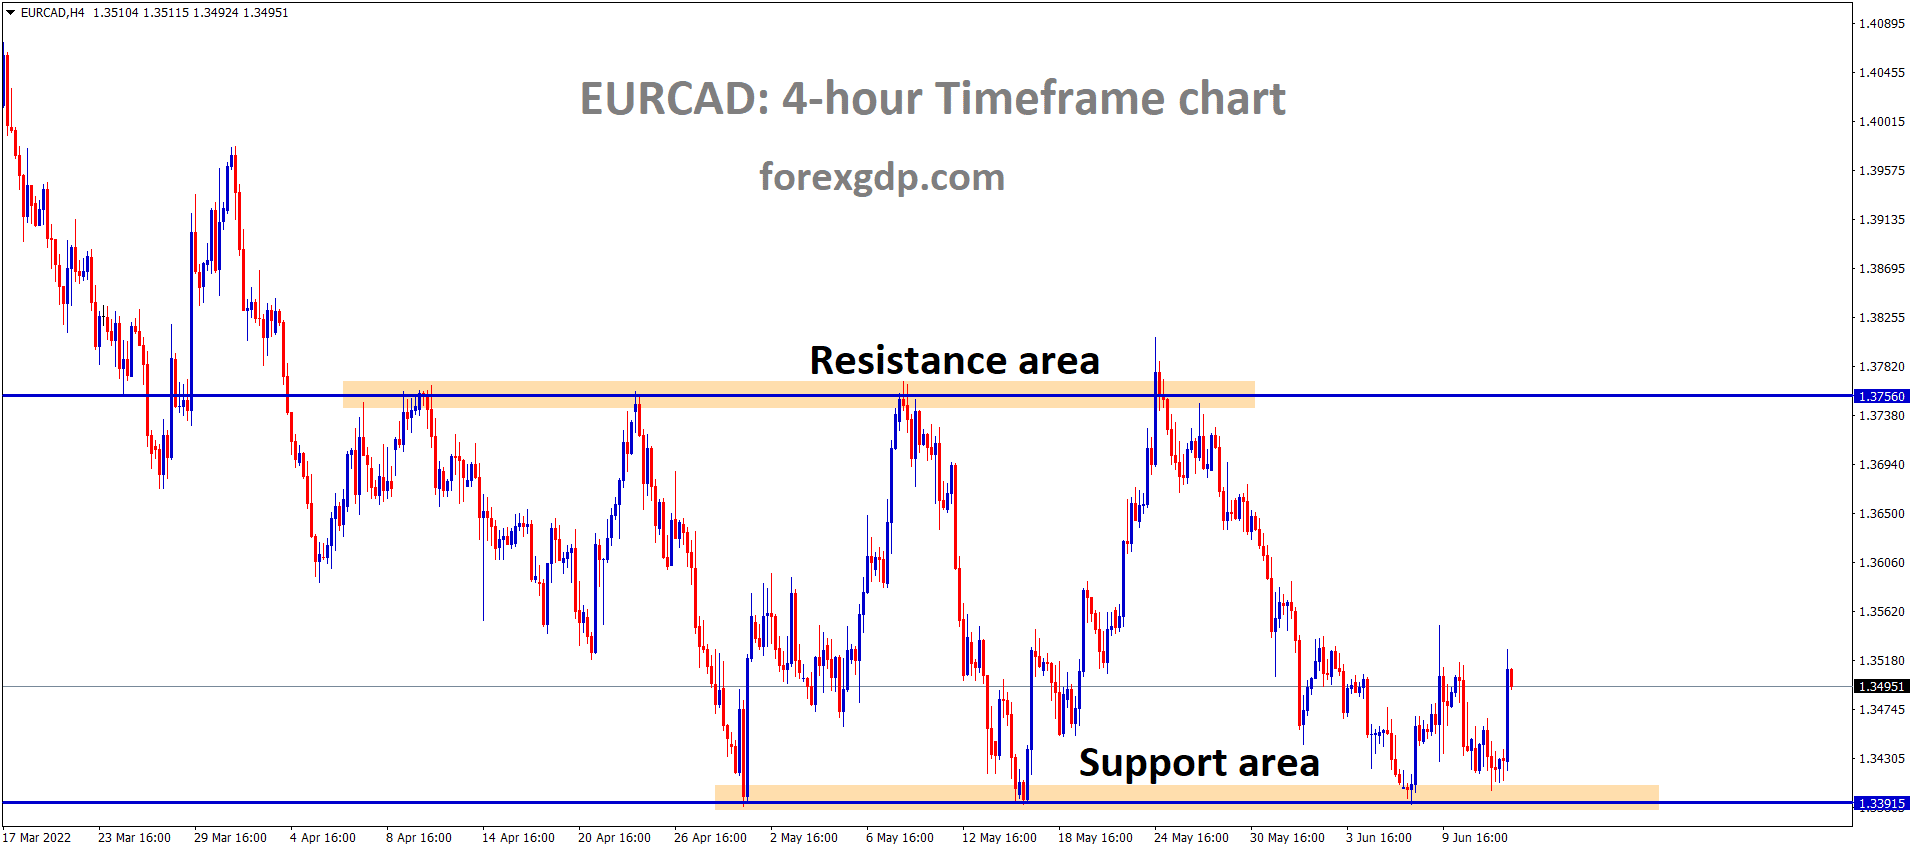 EURCAD is moving in the Box Pattern and the market has rebounded from the horizontal support area of the Pattern.